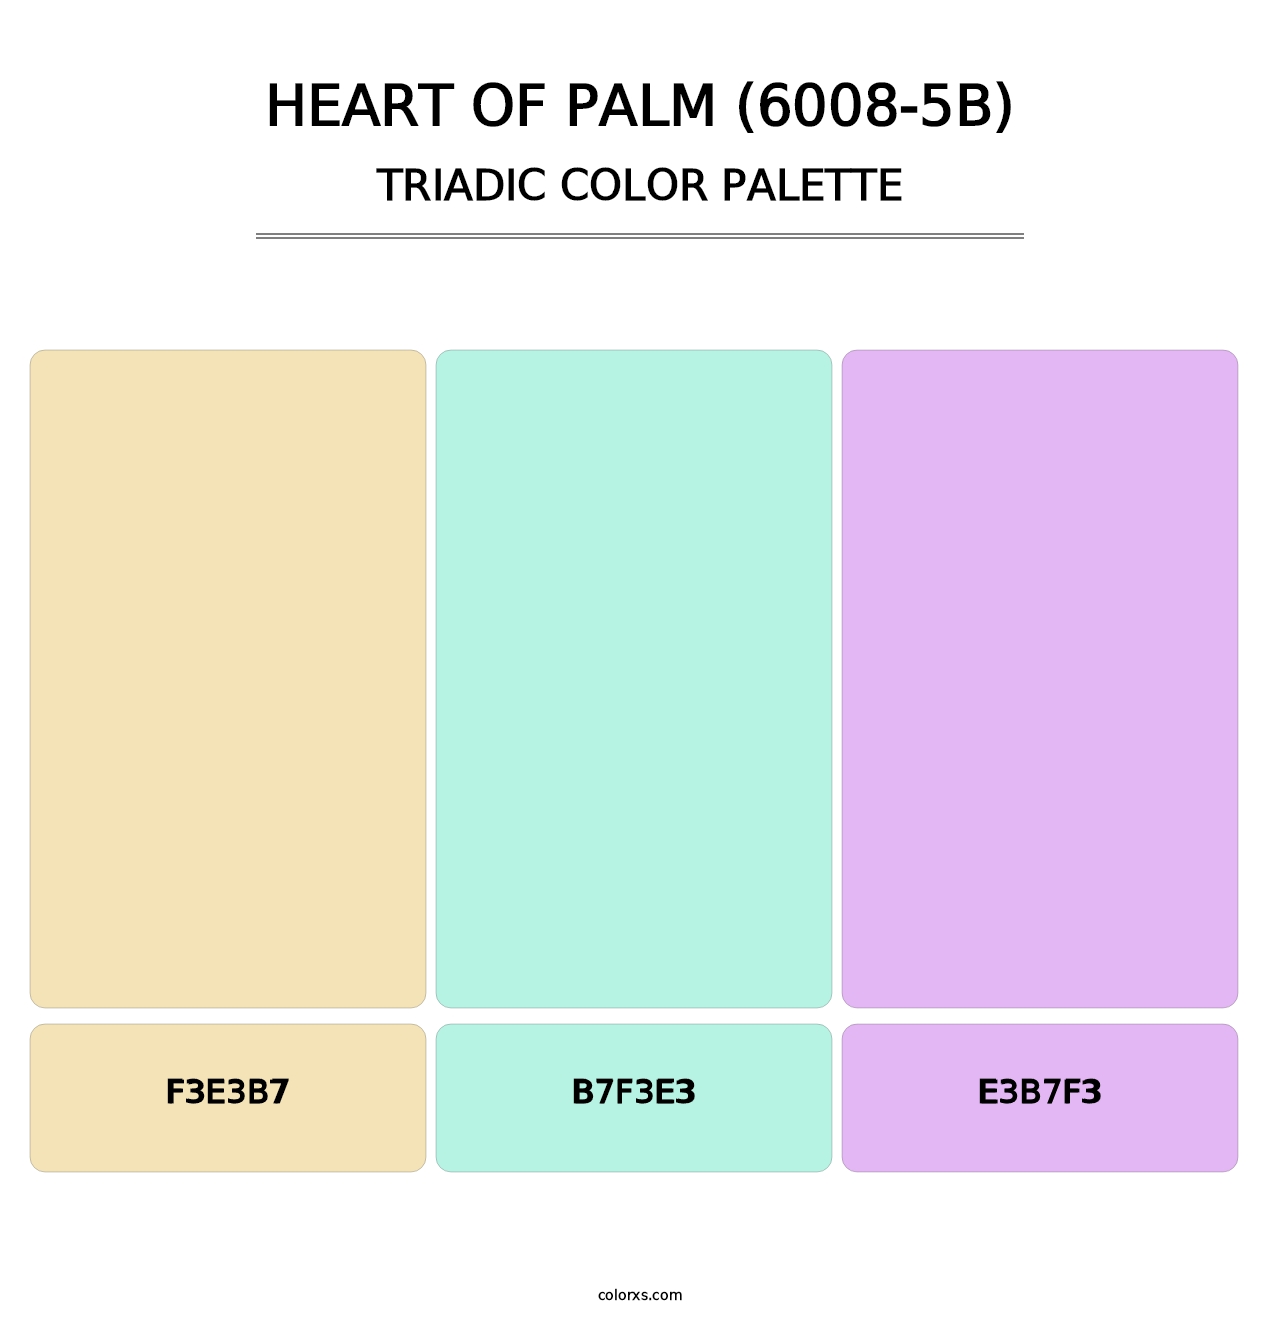 Heart of Palm (6008-5B) - Triadic Color Palette